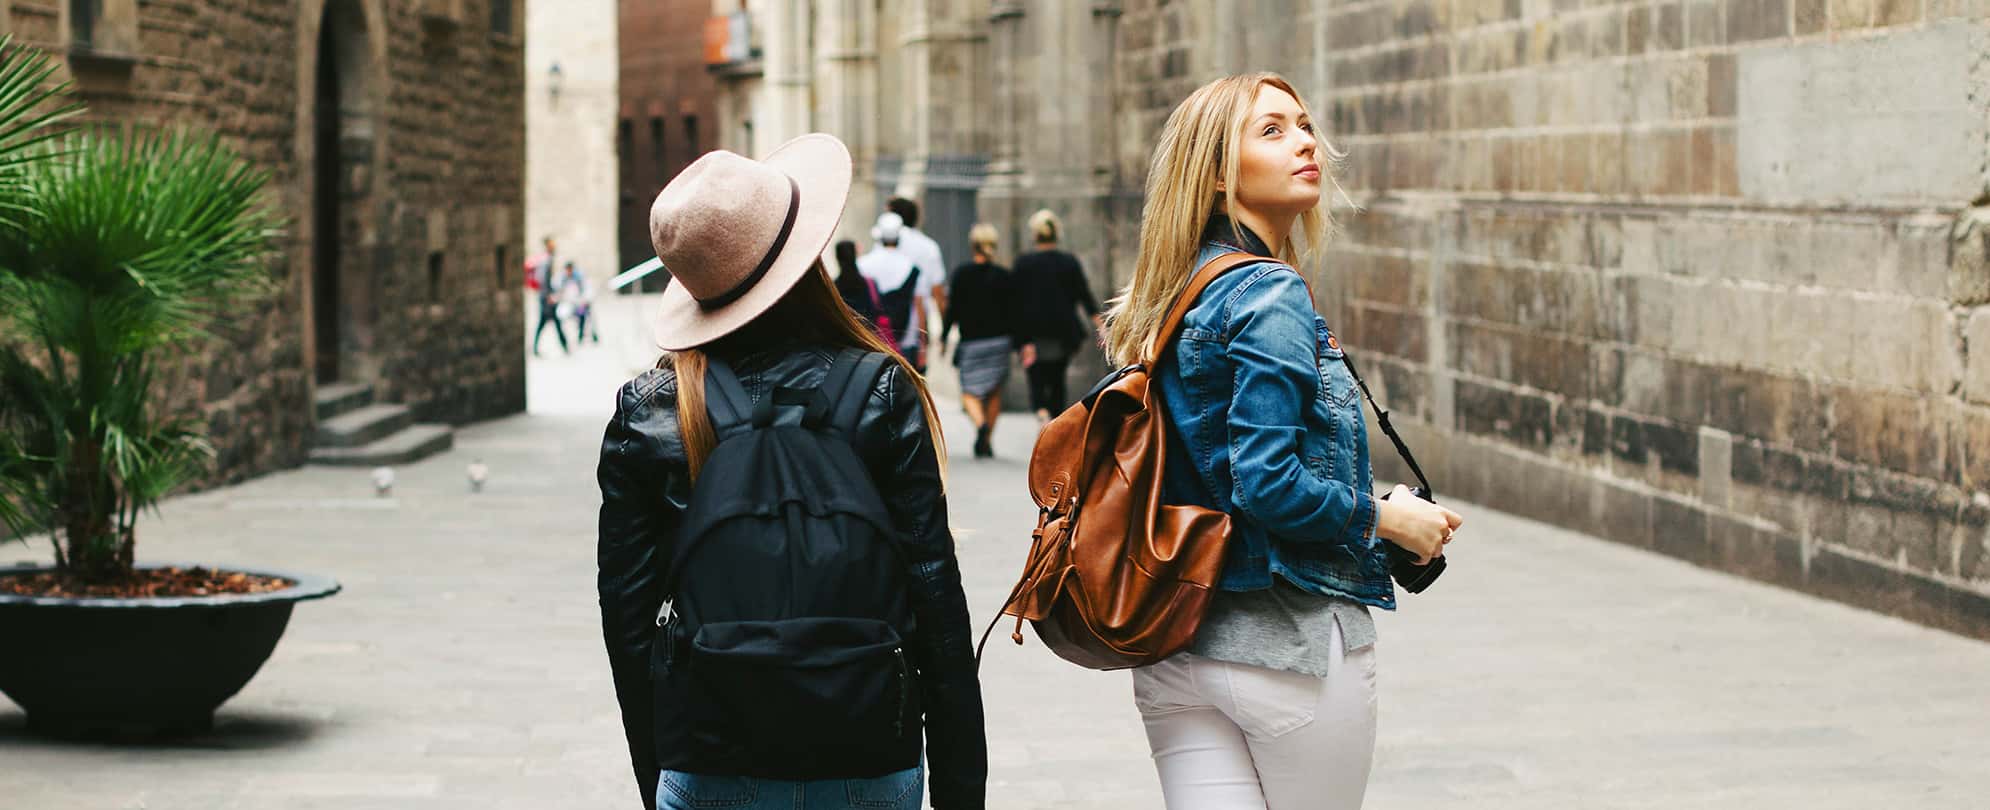 Two young women wearing backpacks walk through the city of Barcelona, Spain.